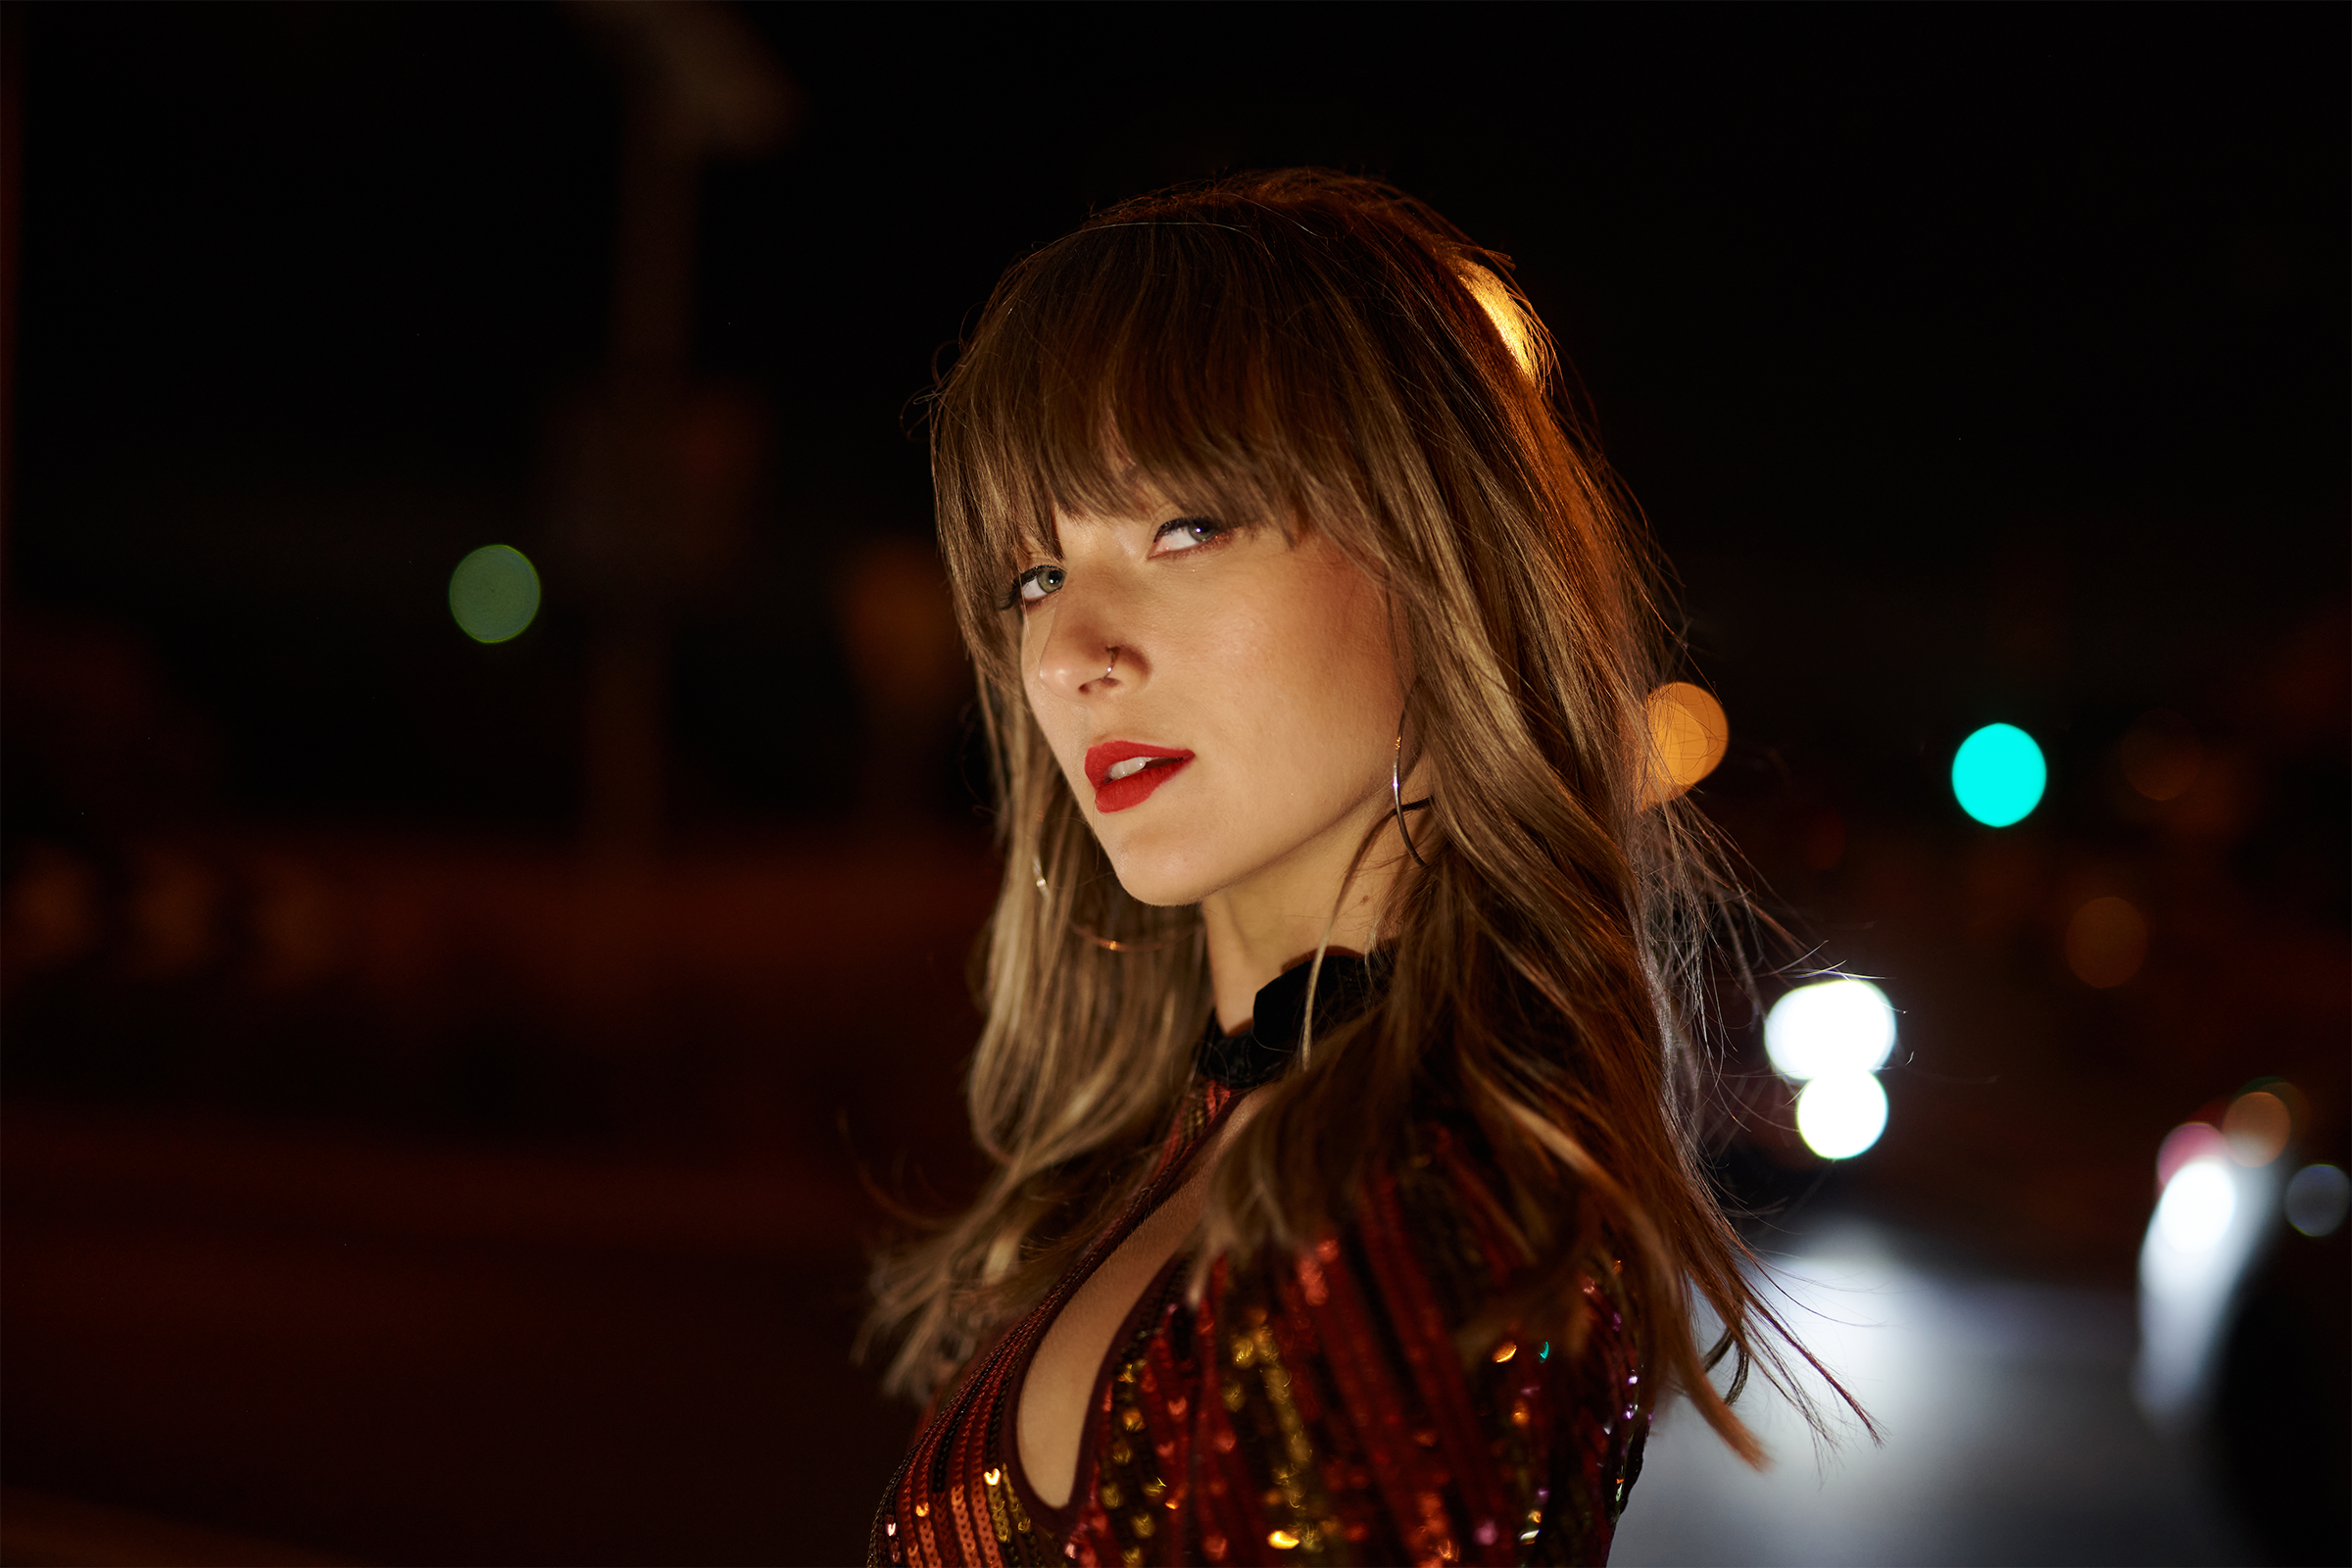 GRETTA RAY announces the release of her debut album - 'Begin to Look Around' 1